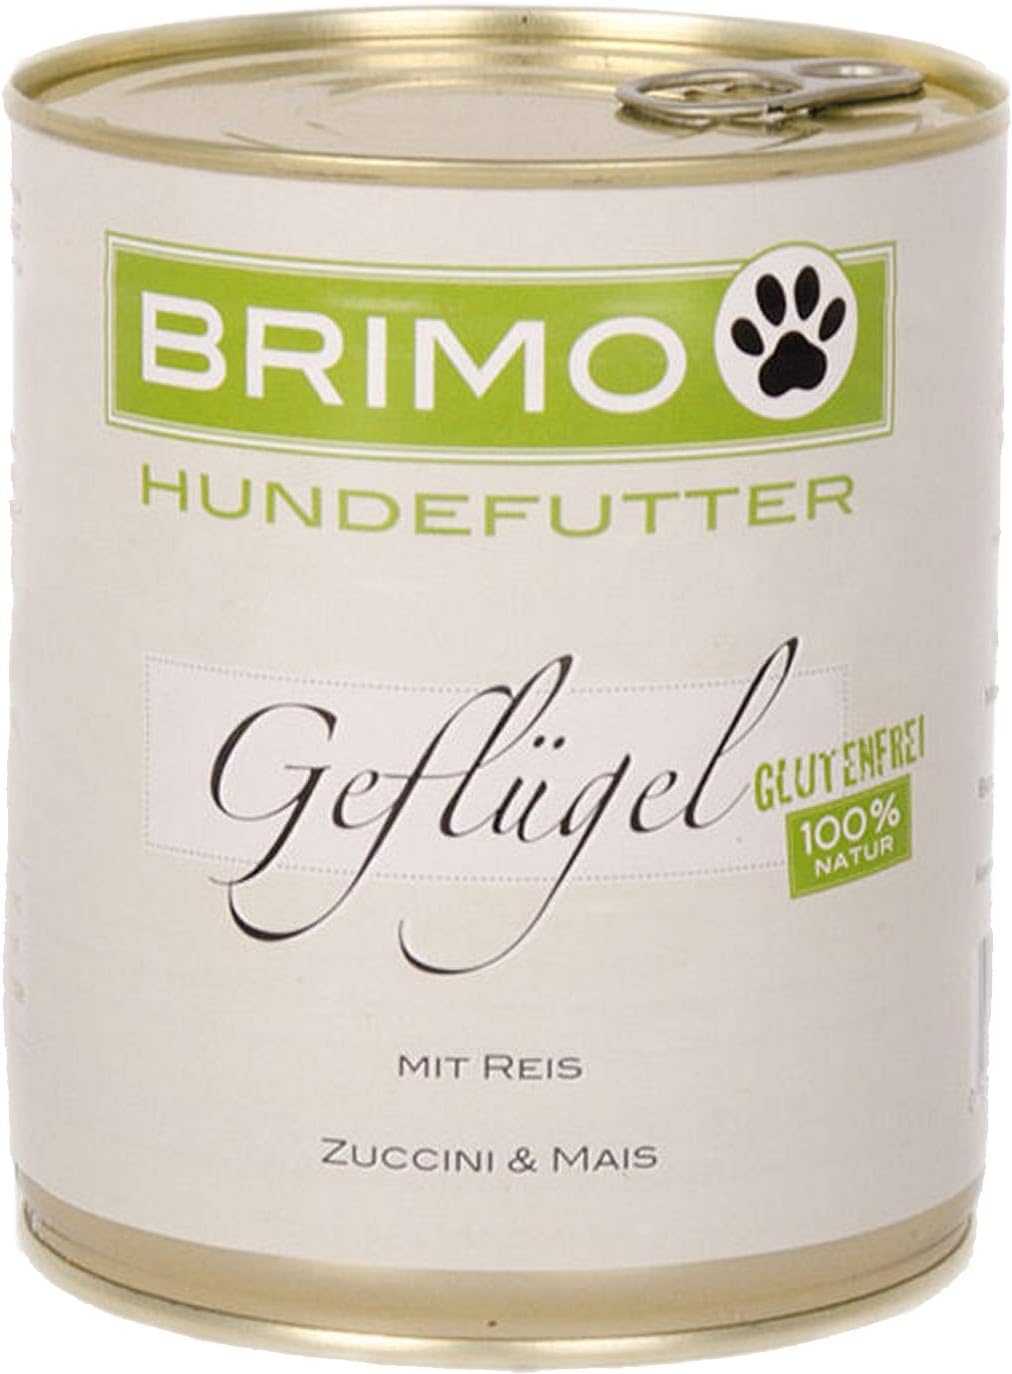 You are currently viewing BRIMO Geflügel mit Reis